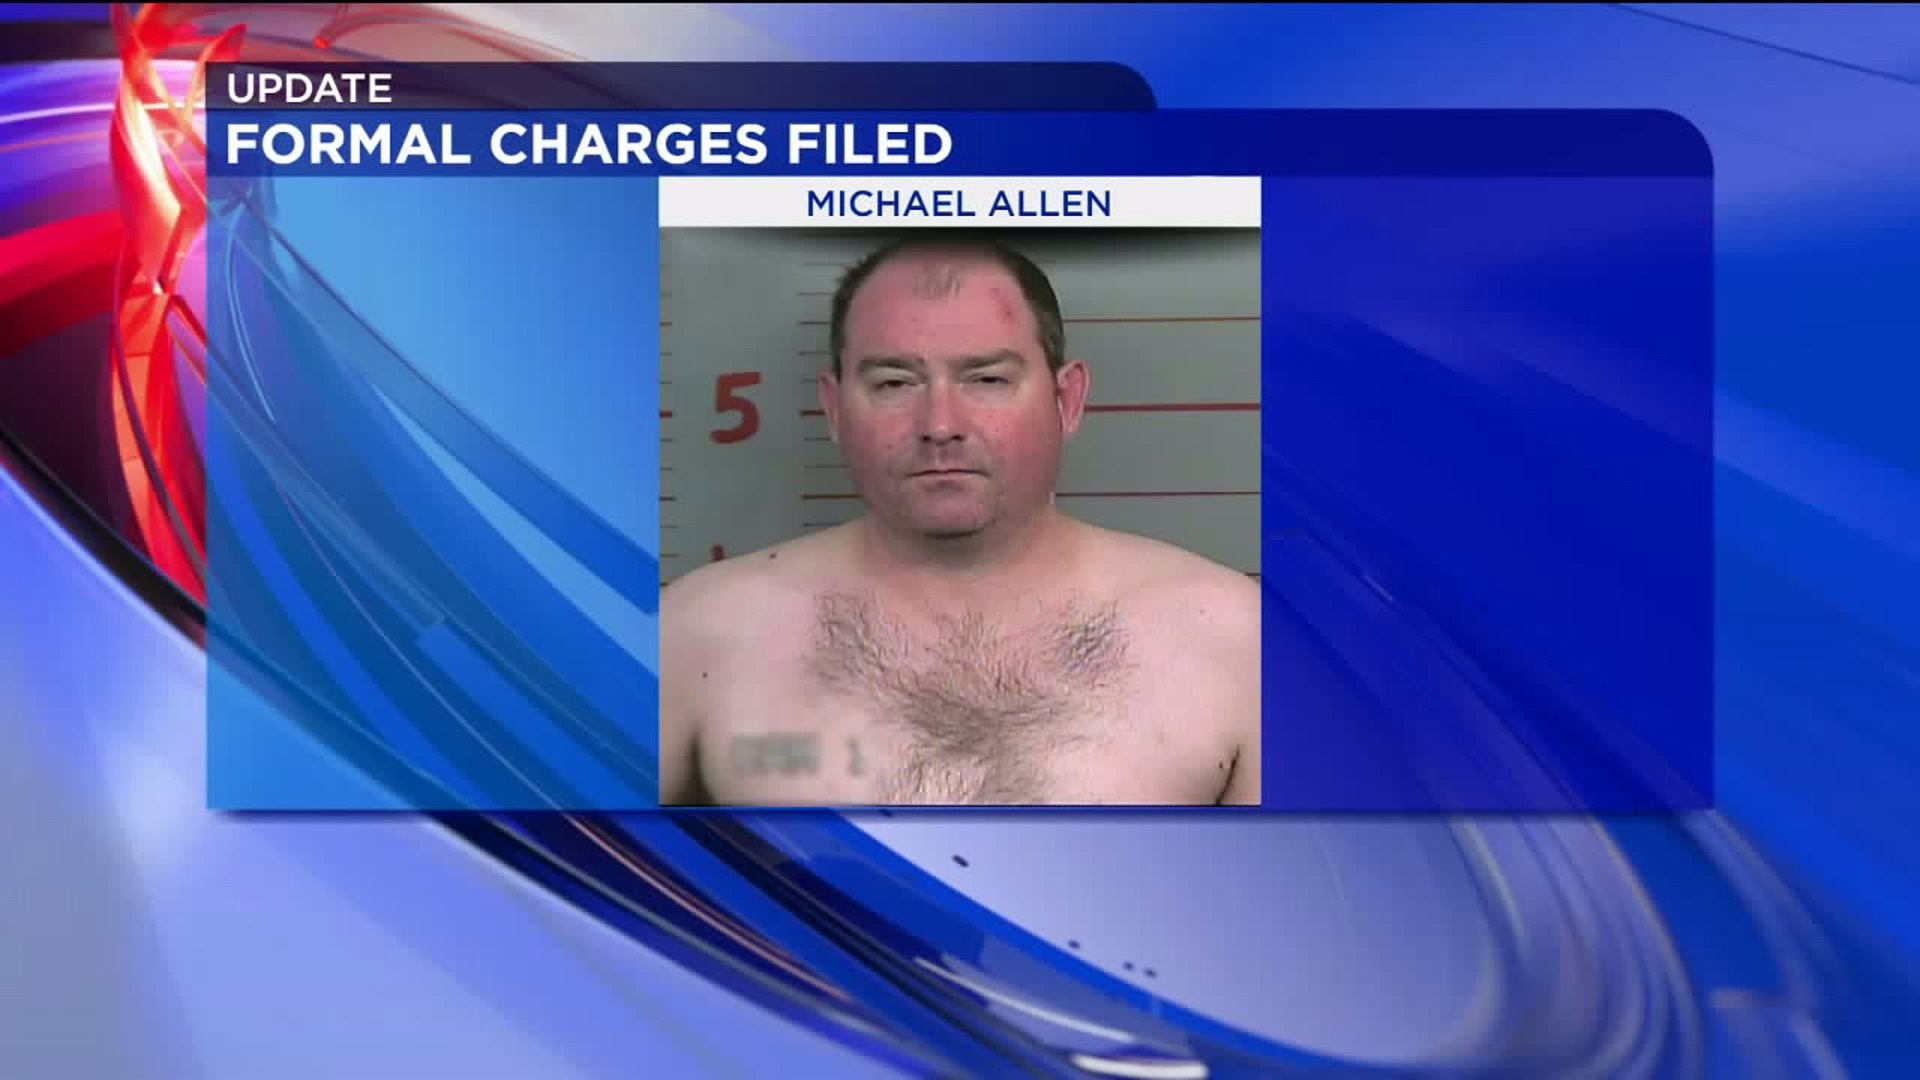 Moline Man Formally Charged for Bomb Threats